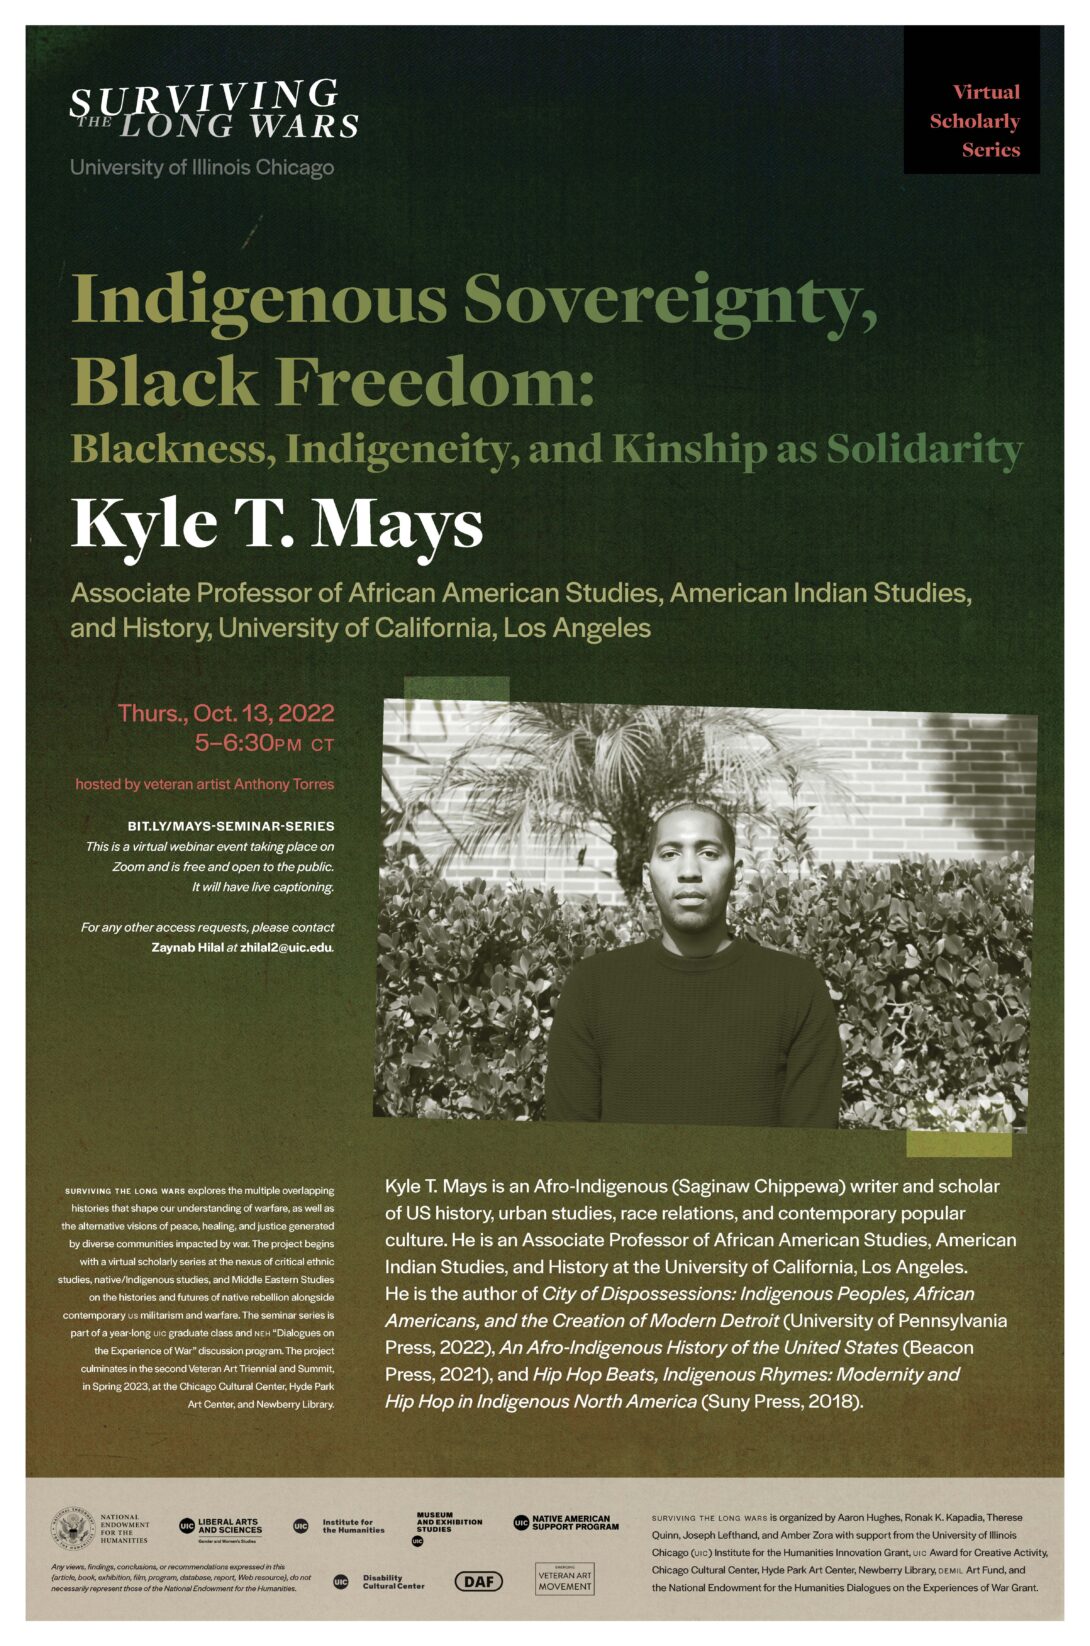 A dark green poster with white text announcing a virtual lecture by Professor Kyle T. Mays on Thursday, October 13th. The project’s title 'Surviving the Long Wars' is written in large text at the top of the flyer along with the Scholar Series’s title “Indigenous Sovereignty, Black Freedom: Blackness, Indigeneity, and Kinship as Solidarity”. The poster has a headshot of Professor Mays, his bio, and details about the series.